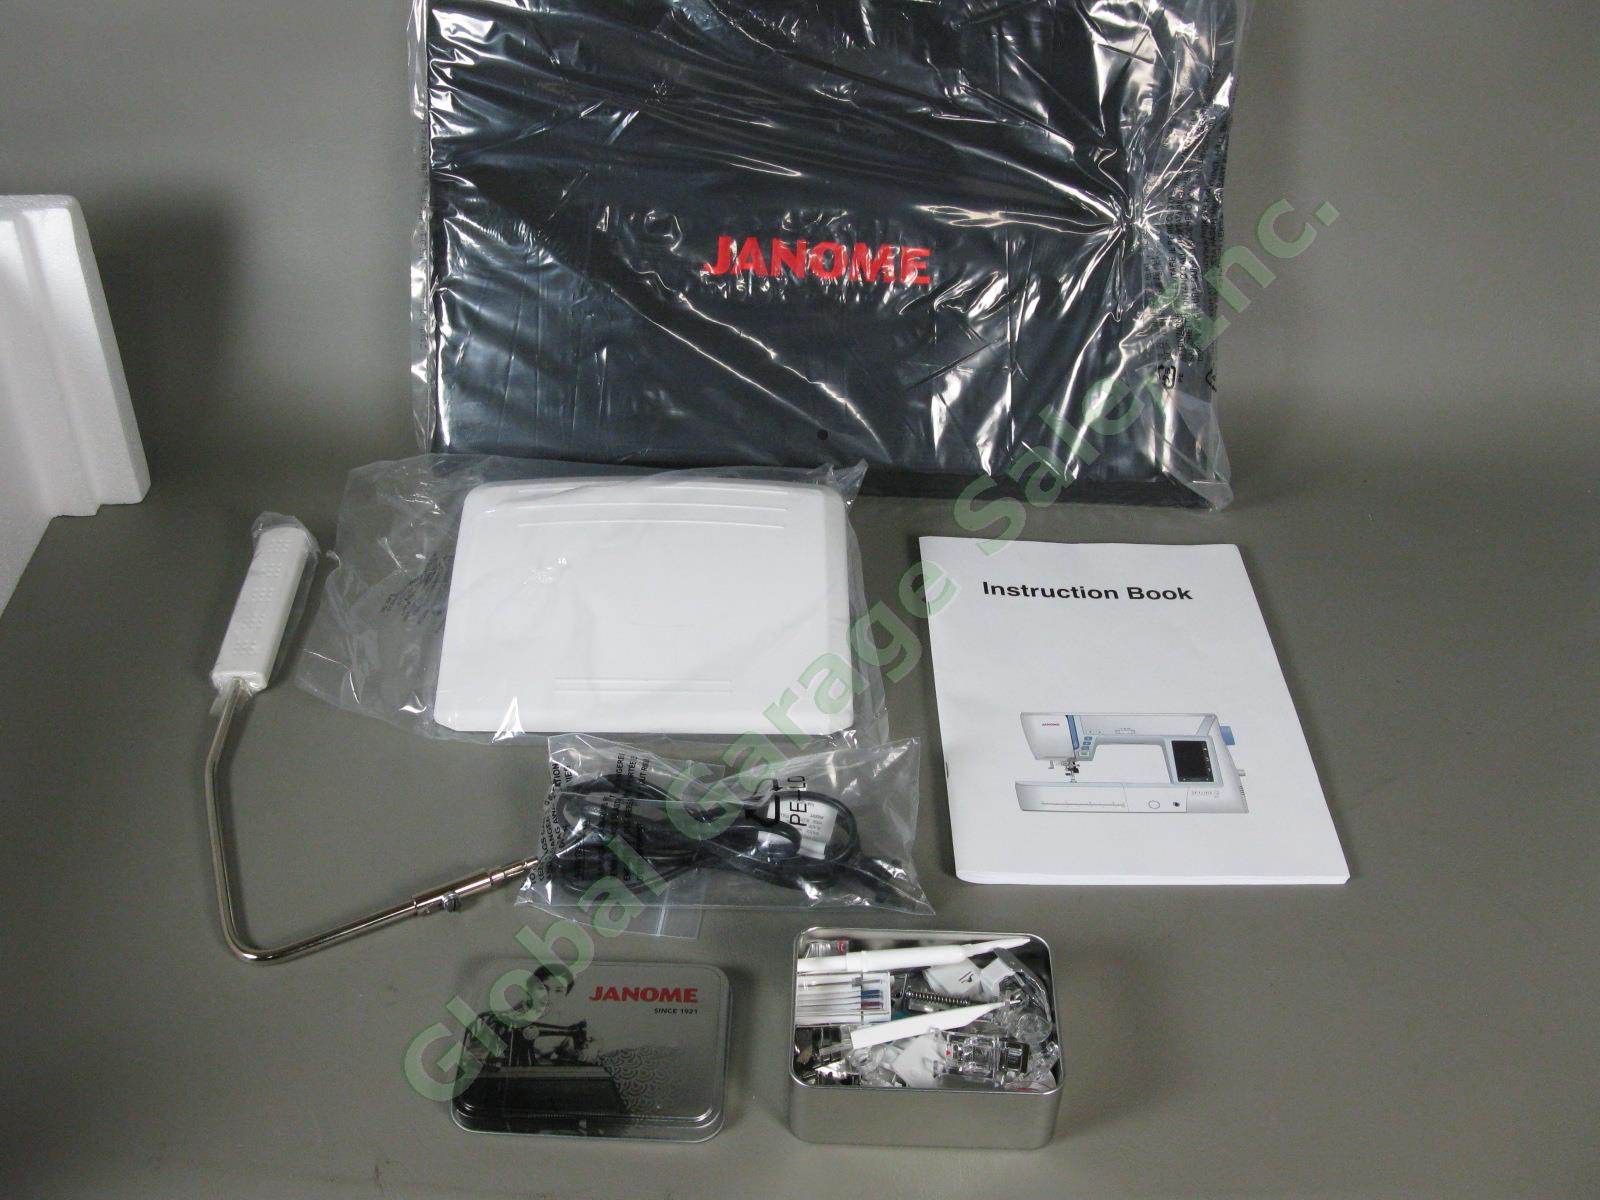 Janome Skyline S7 Sewing Quilting Machine Barely Used! Mint Condition! Orig Box! 10